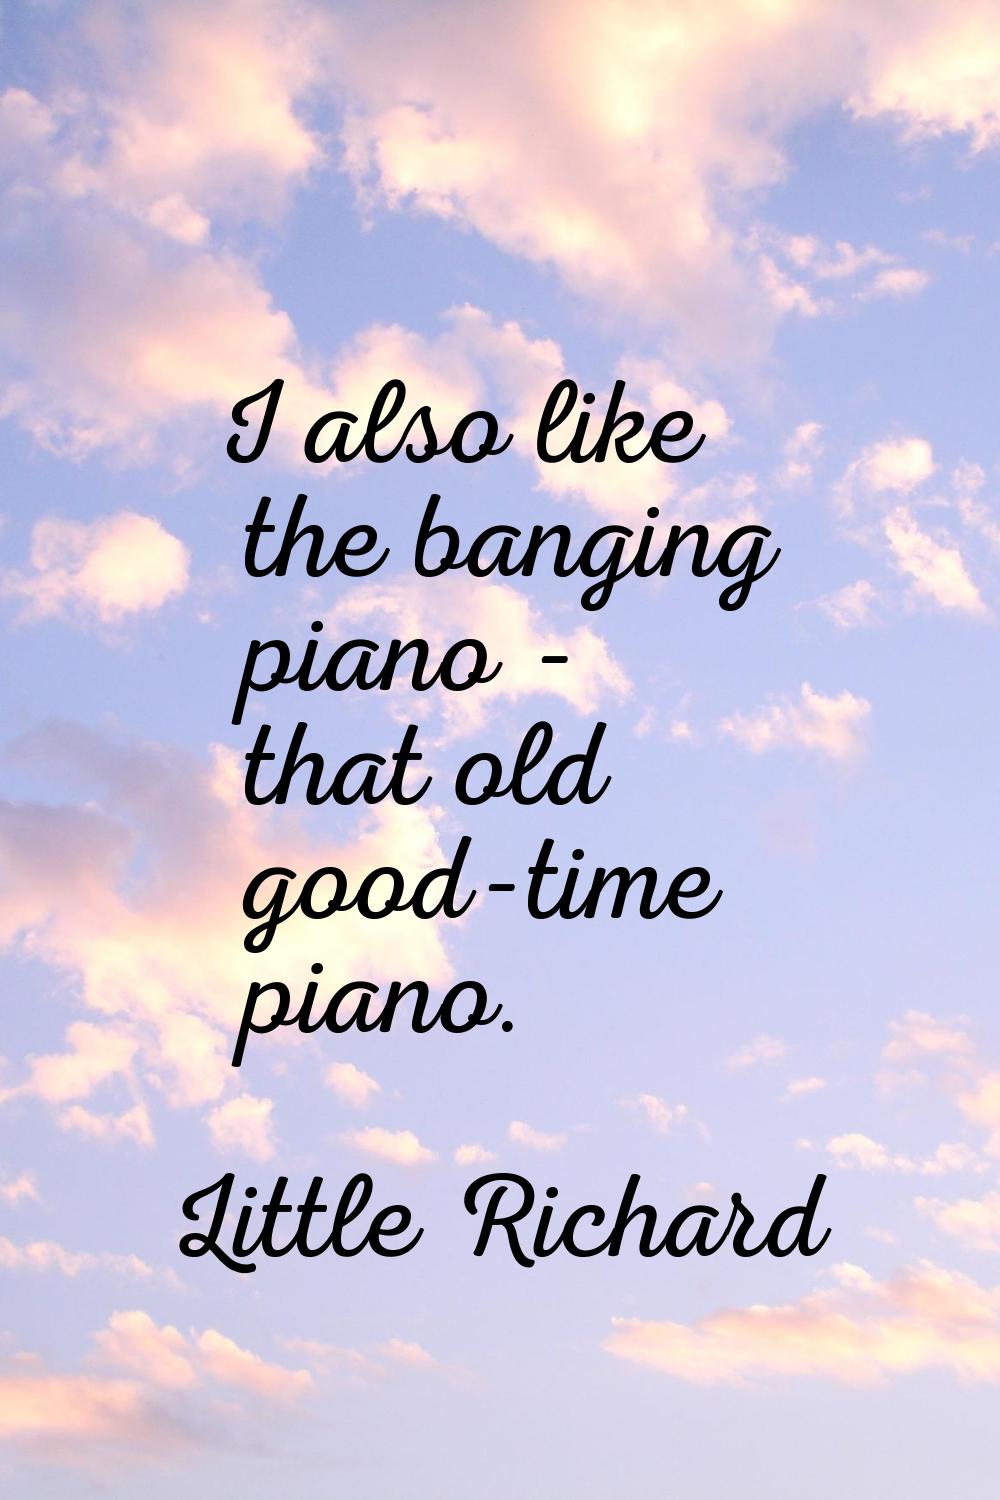 I also like the banging piano - that old good-time piano.